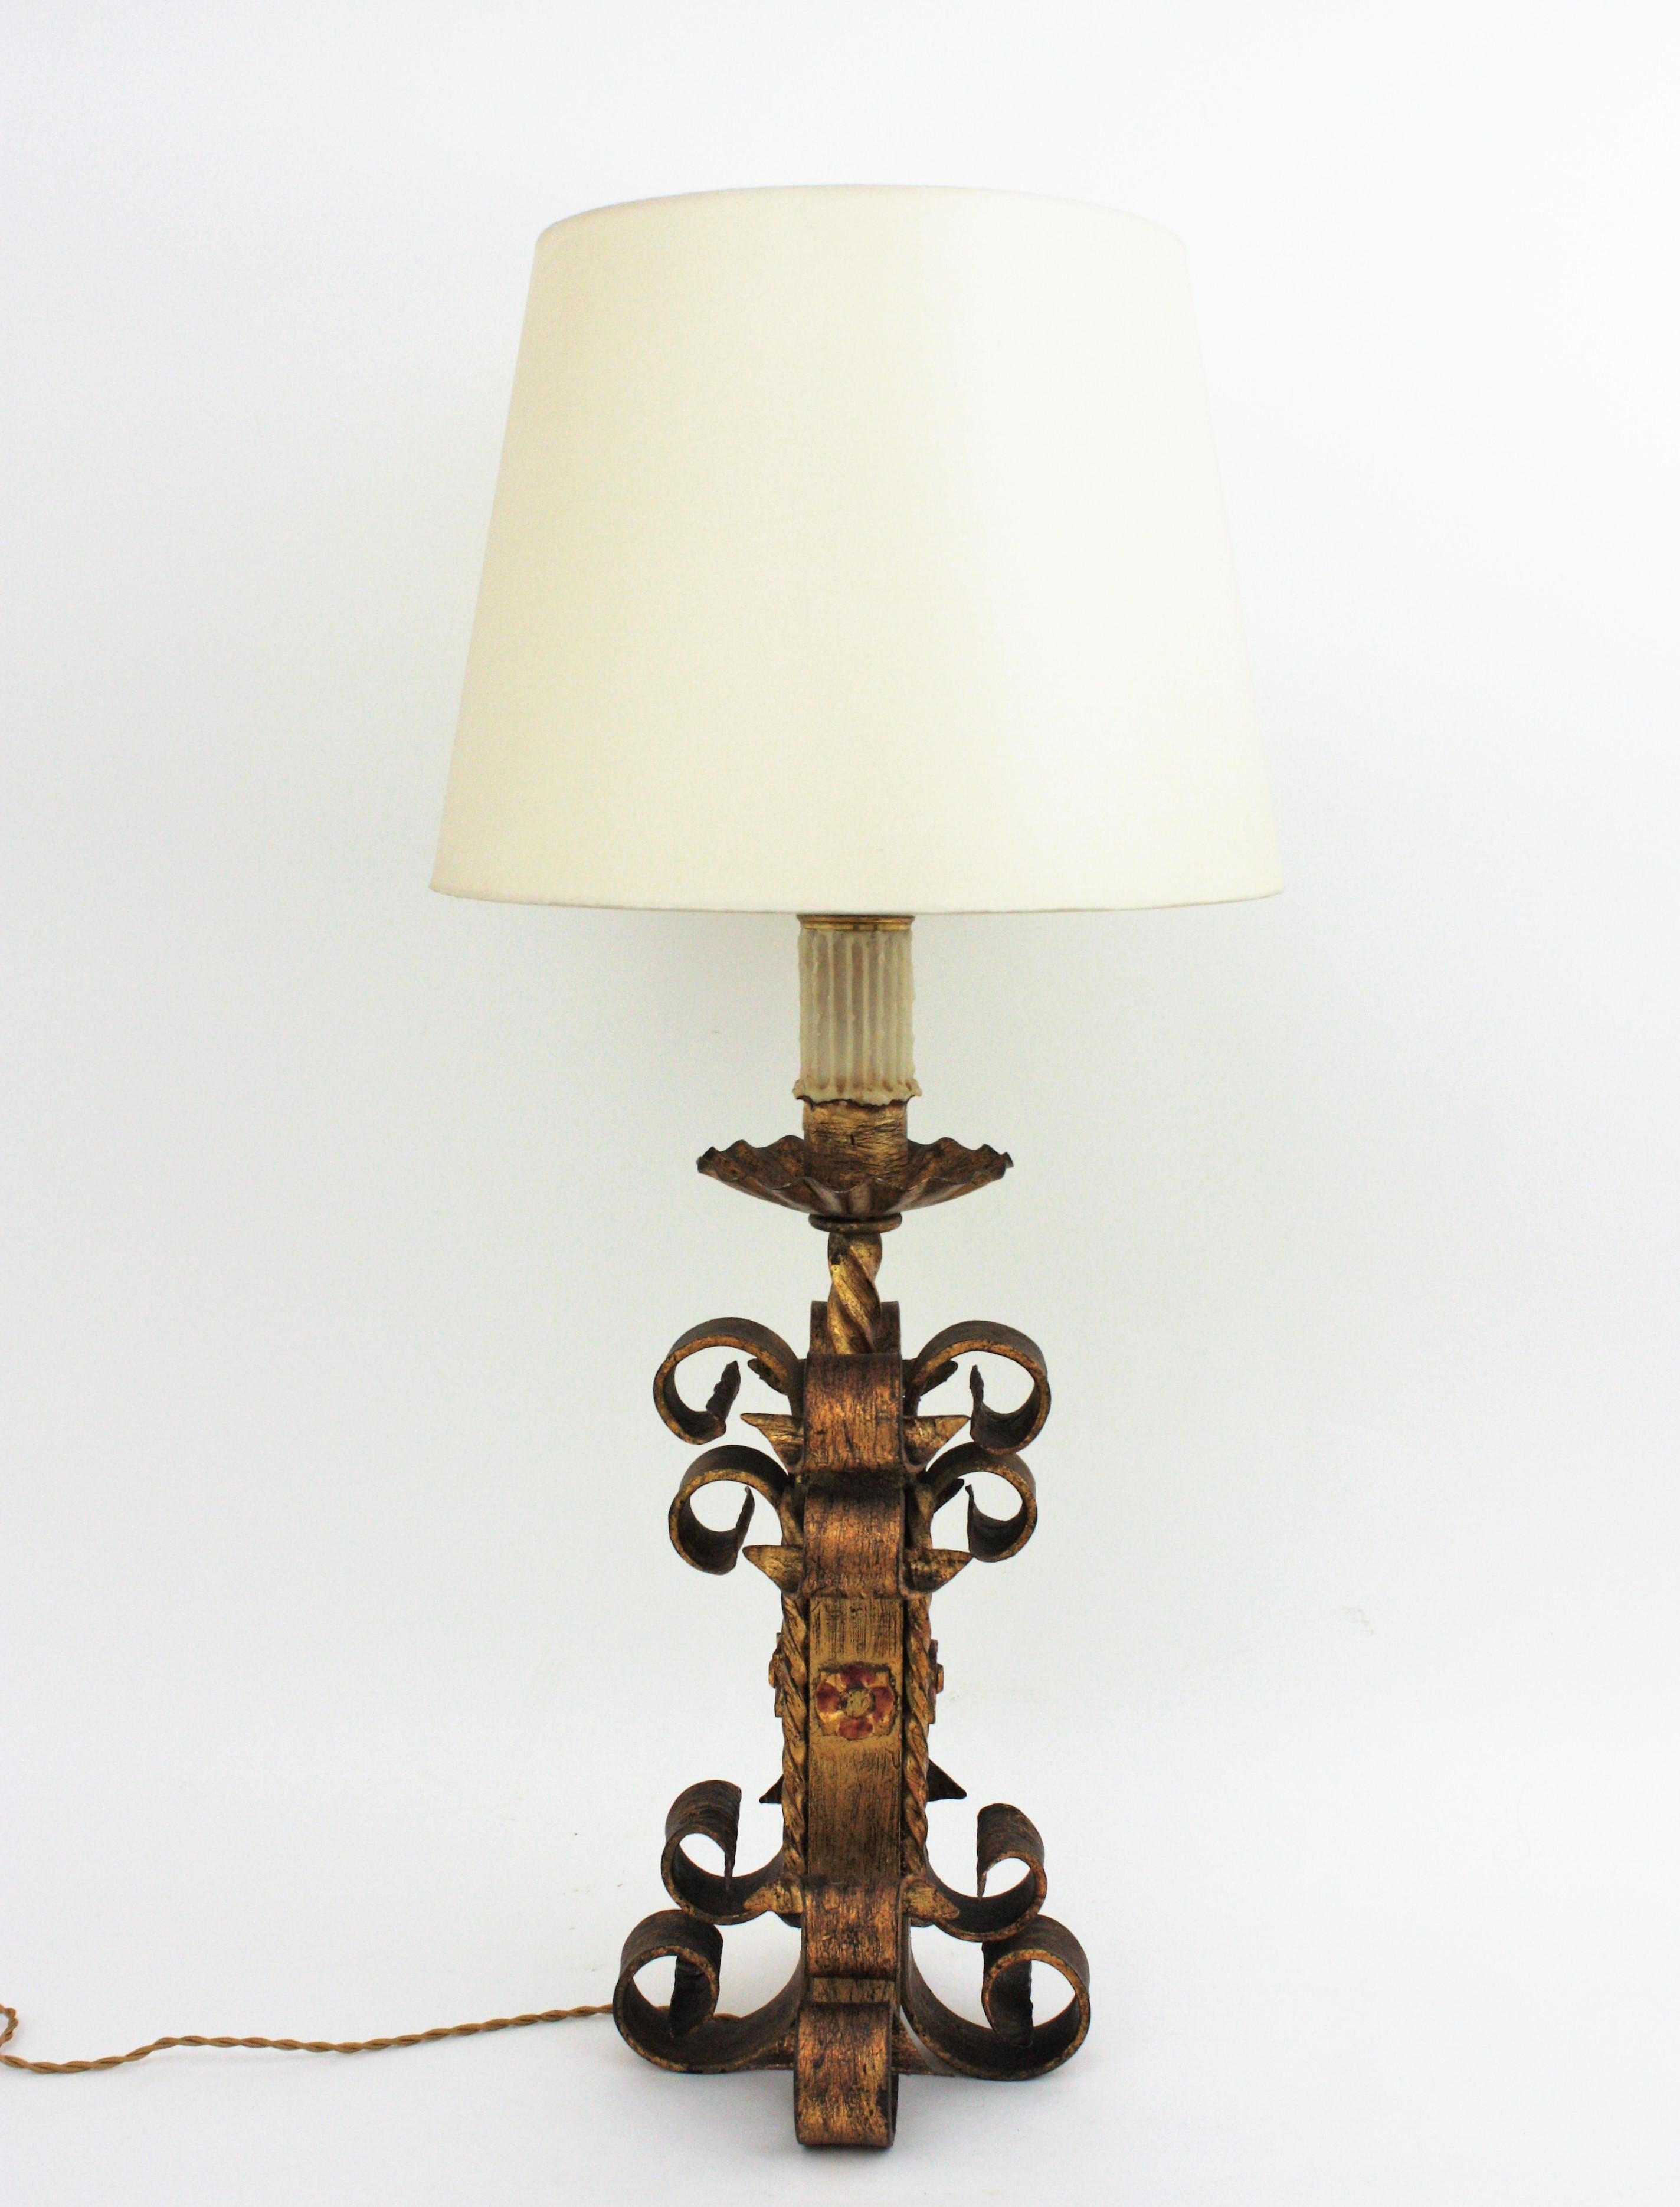 Spanish Colonial Spanish Revival Scrollwork Table Lamp in Gilt Wrought Iron, 1940s